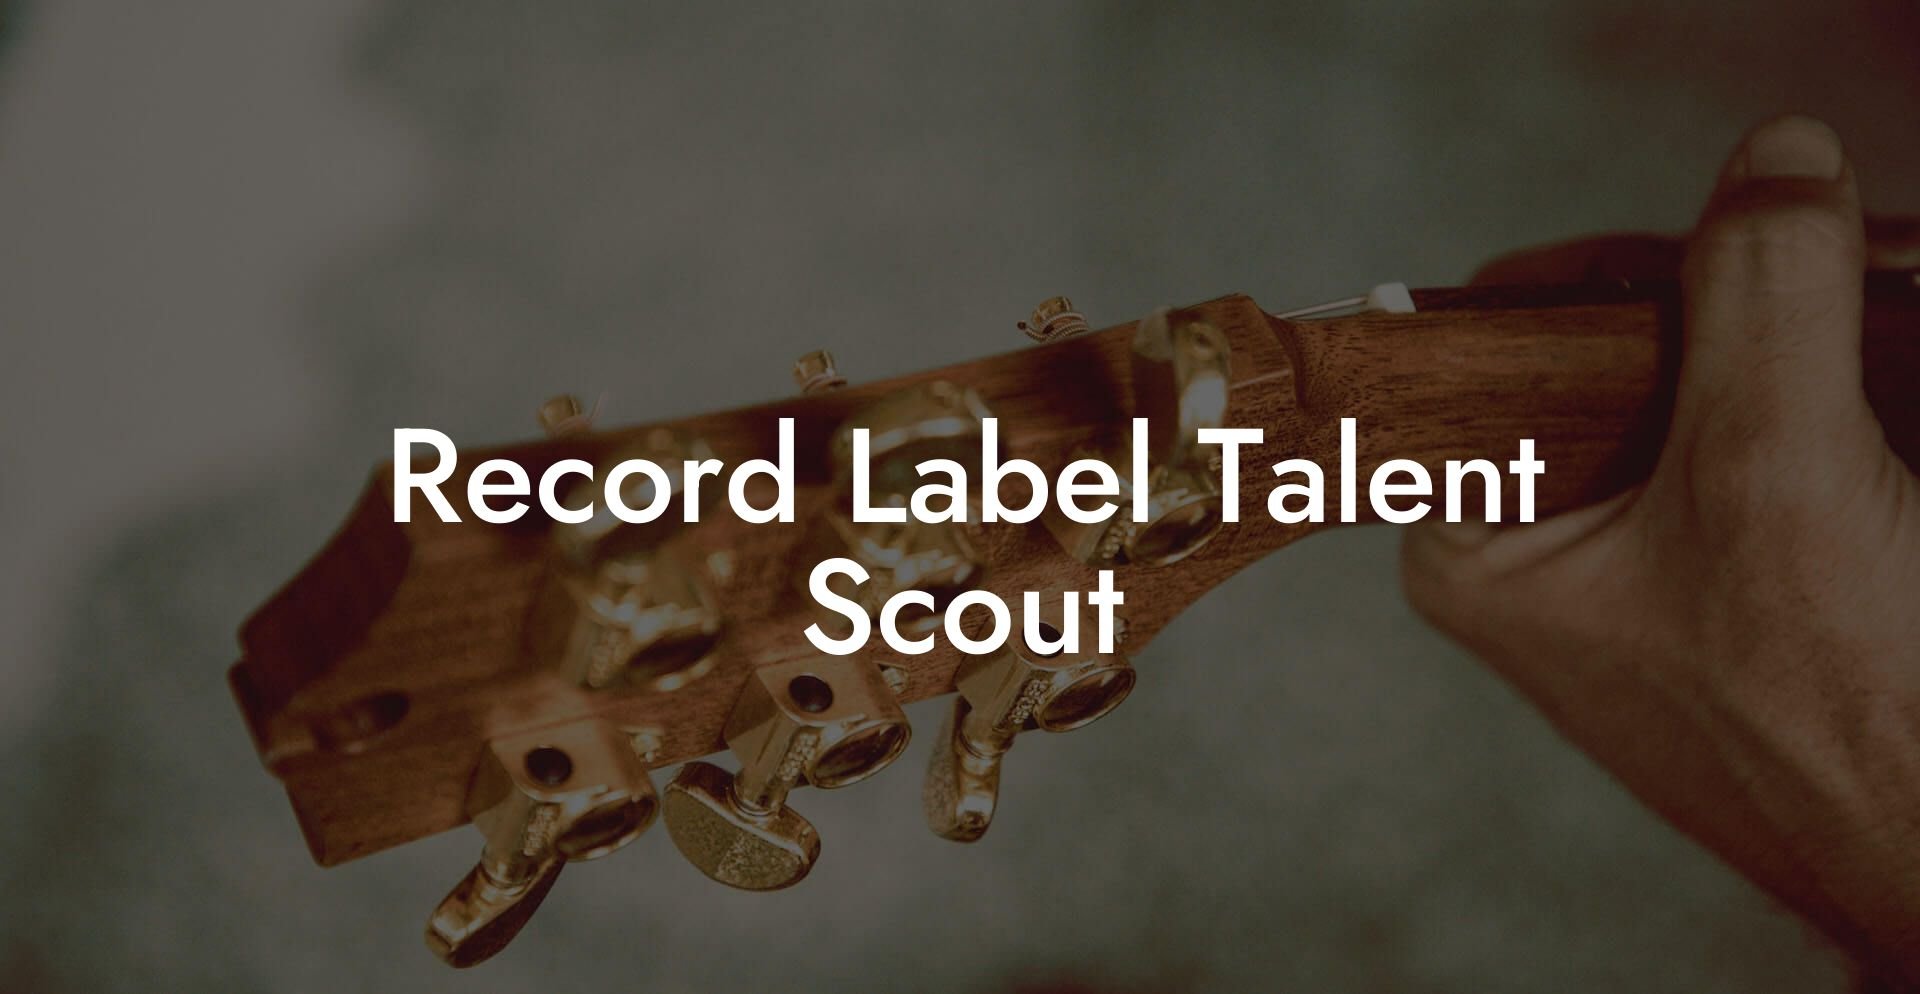 Record Label Talent Scout